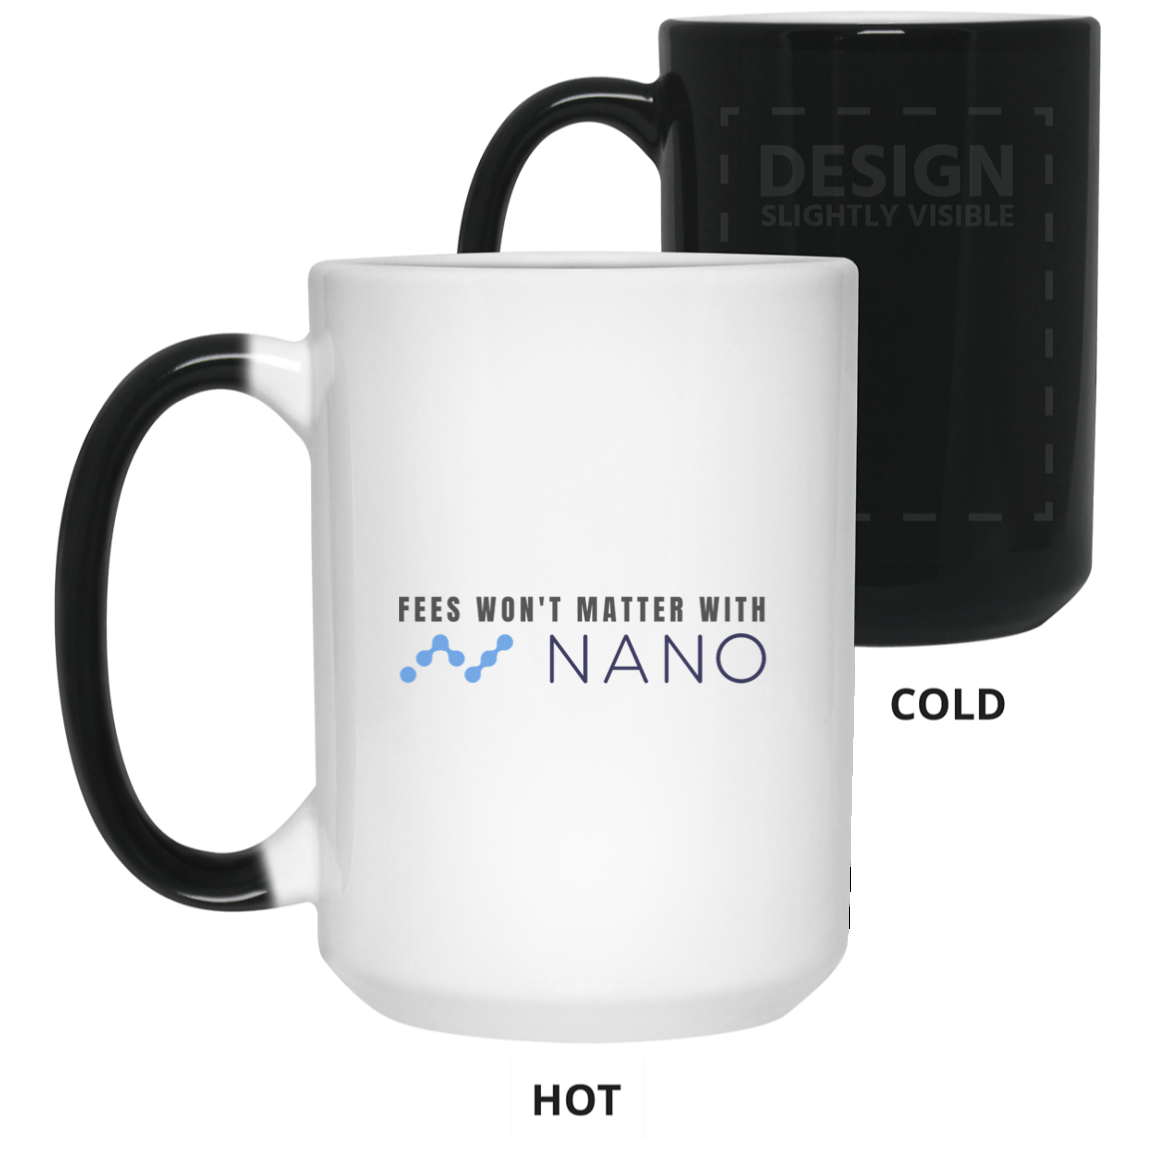 Fees won't matter with nano - 15 oz. Color Changing Mug TCP1607 White / One Size Official Crypto  Merch